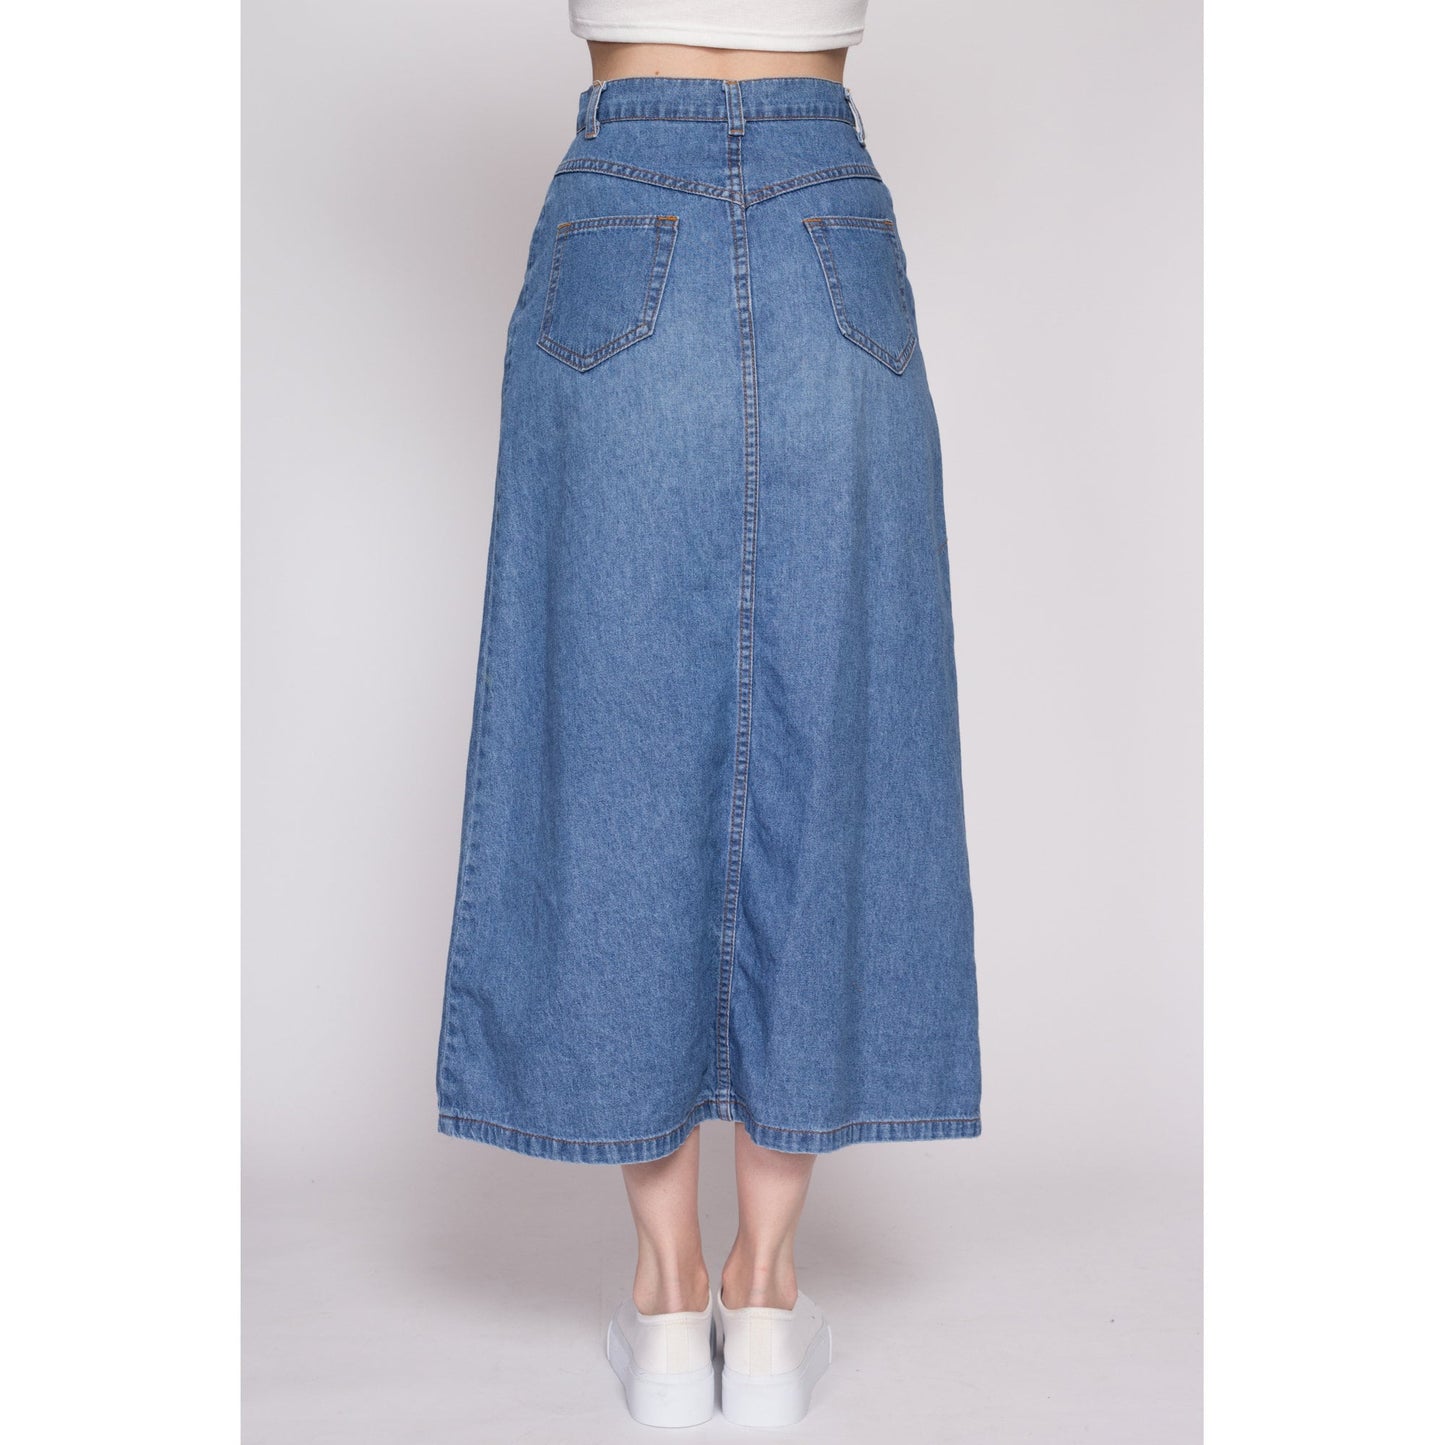 XS-S| 90s Denim Button Front Maxi Skirt - XS to Small, 25" | Vintage Grunge High Waisted Medium Wash Jean Skirt